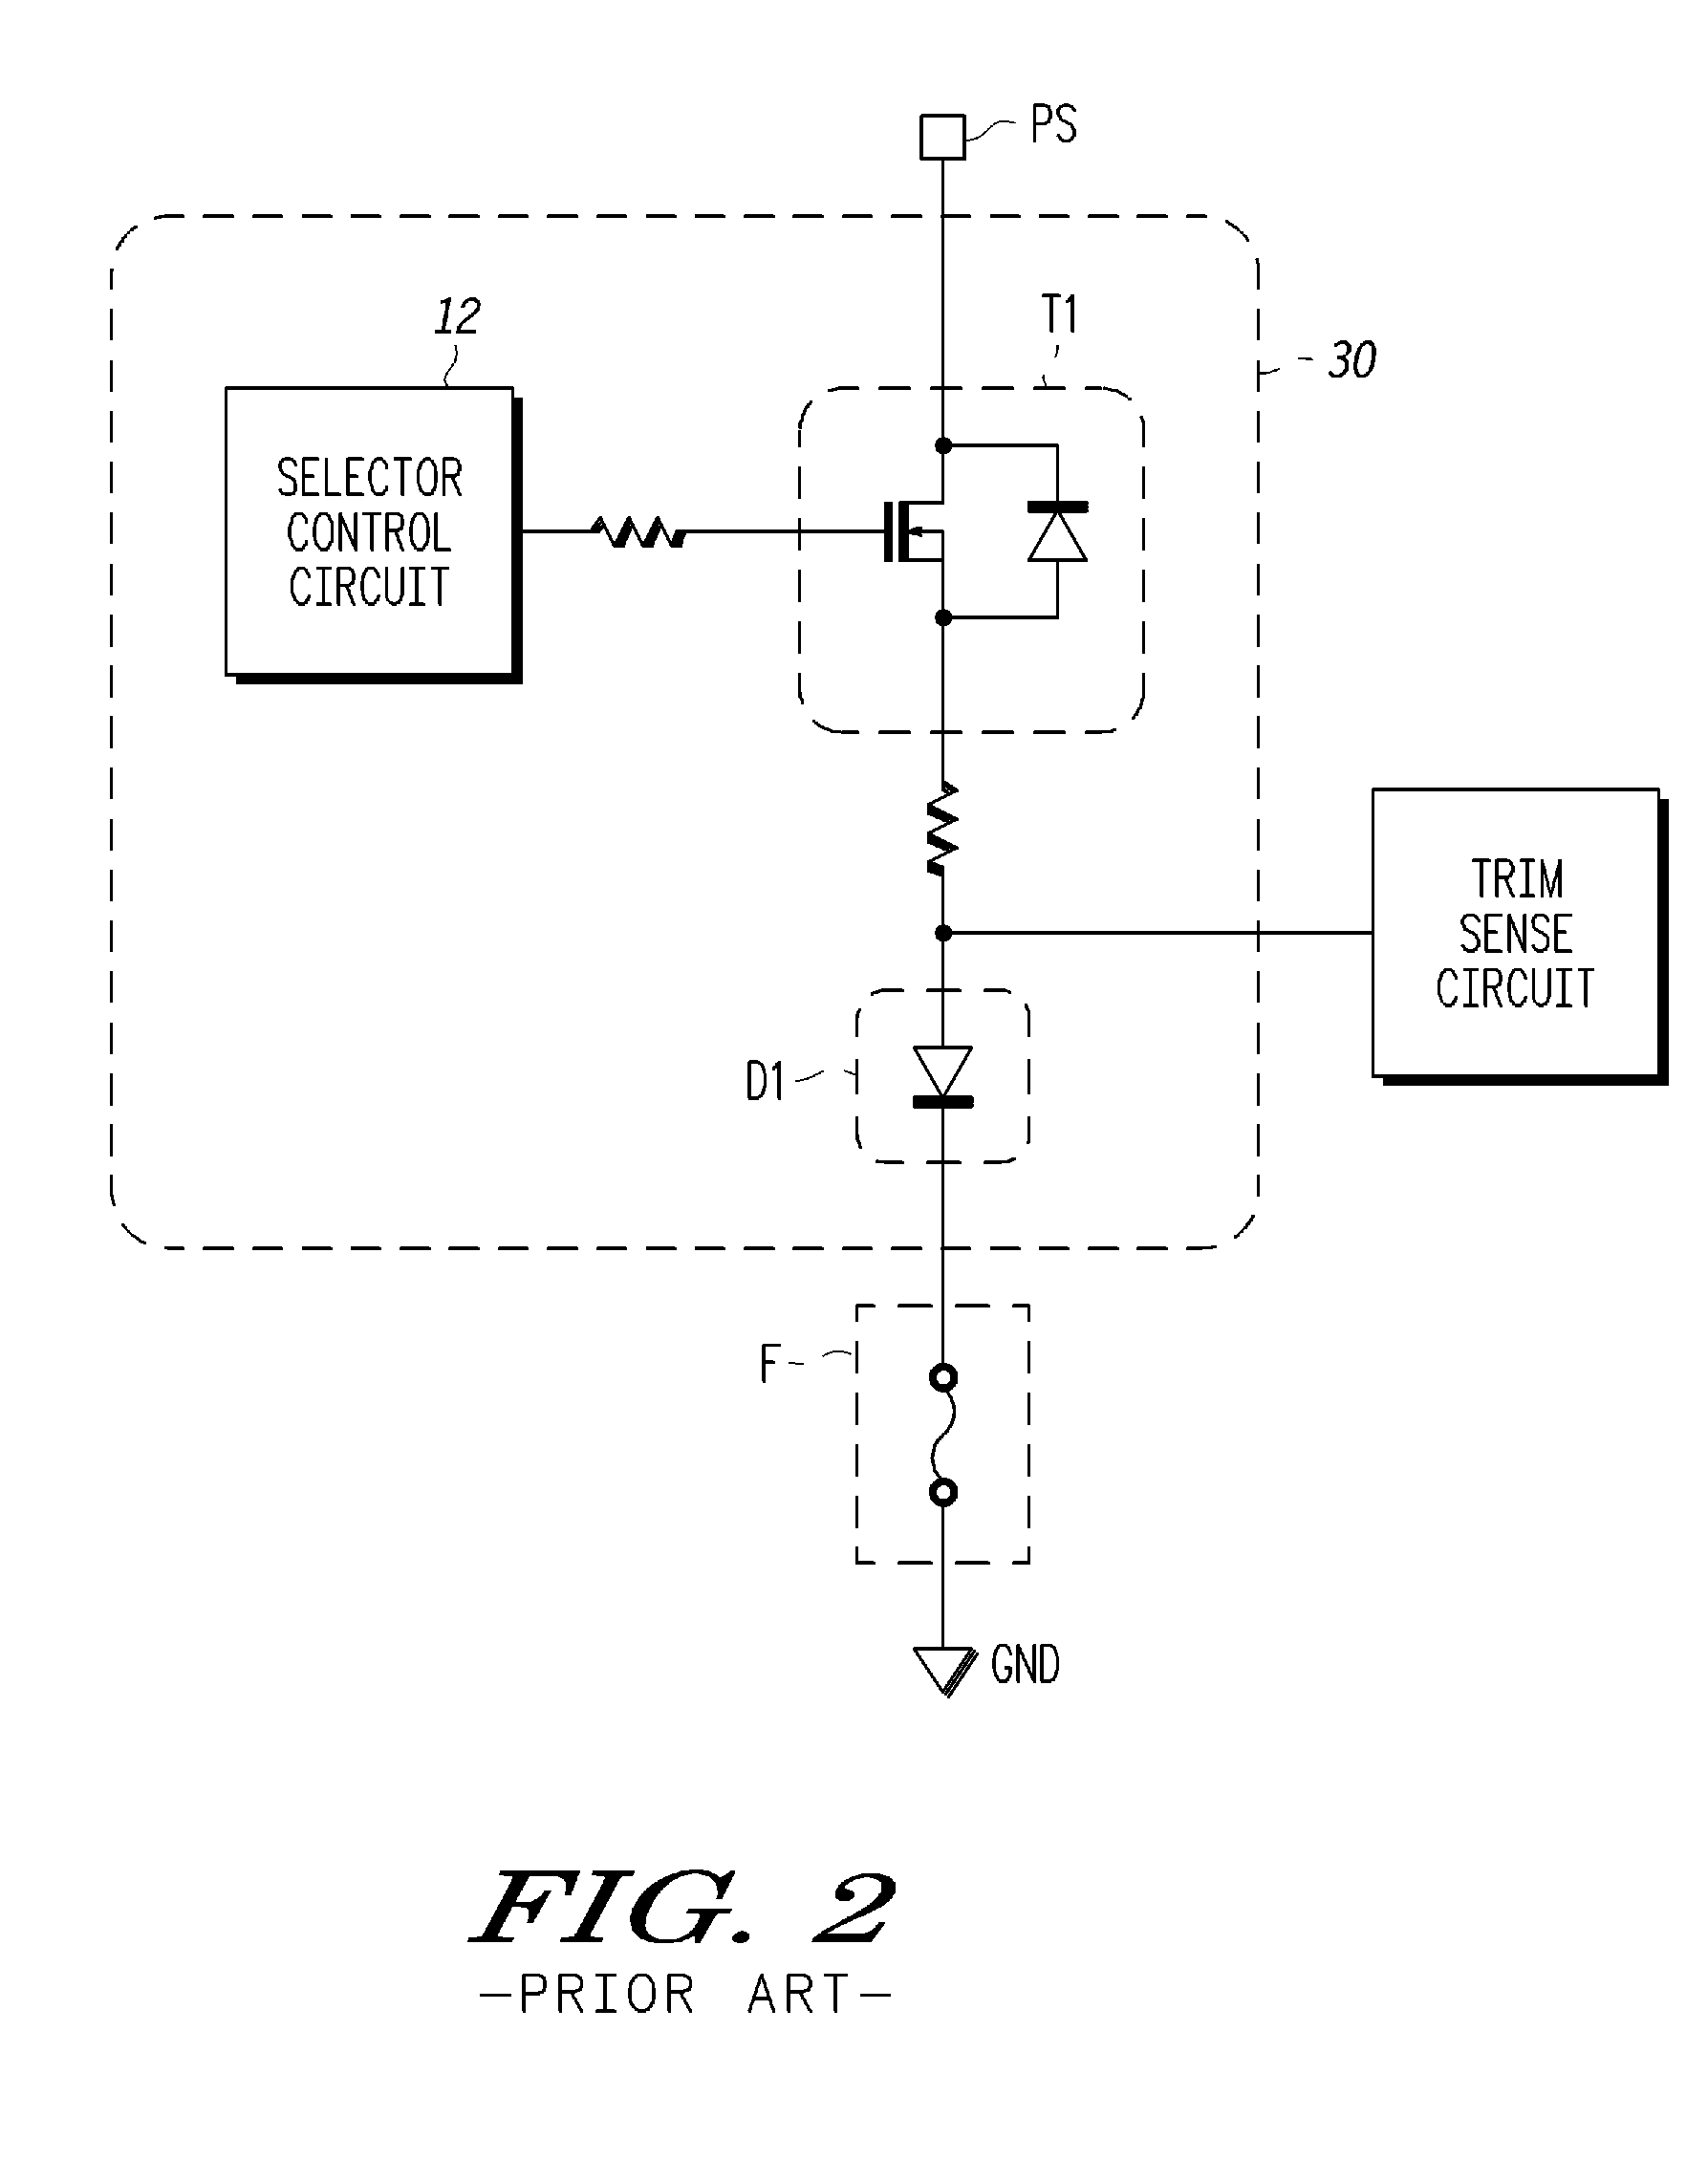 Trimming circuit, electronic circuit, and trimming control system